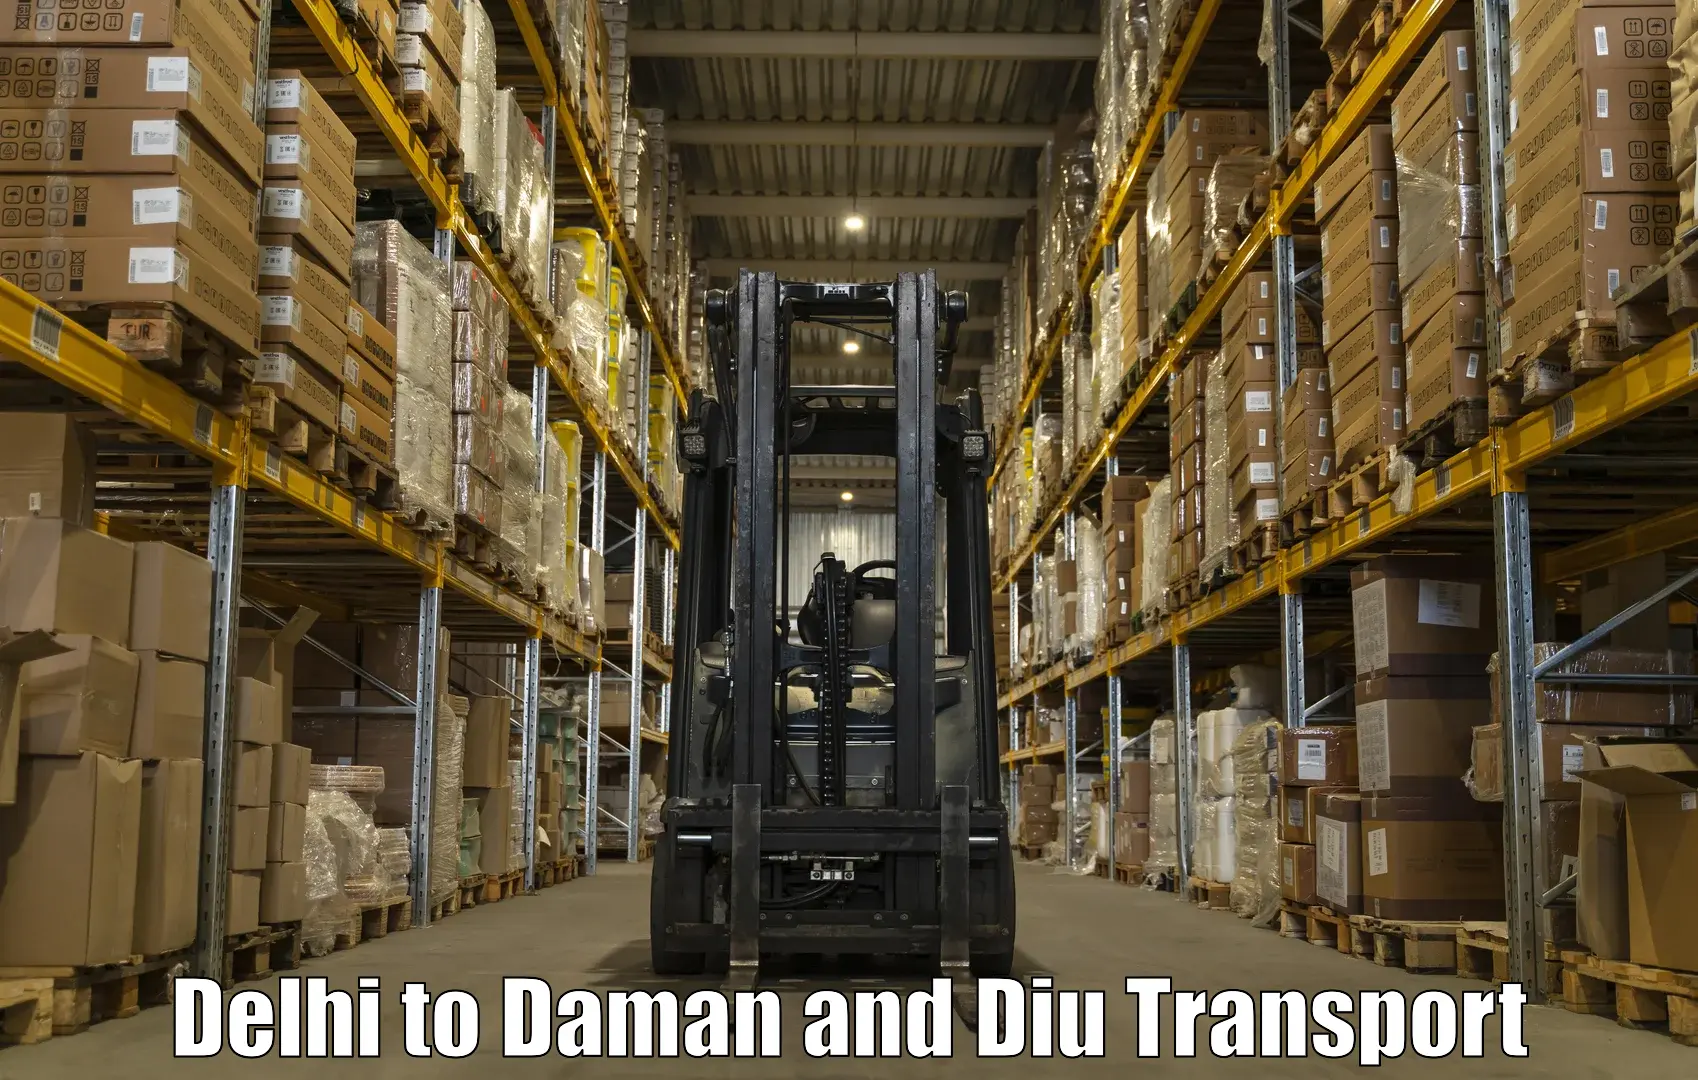 Daily parcel service transport in Delhi to Daman